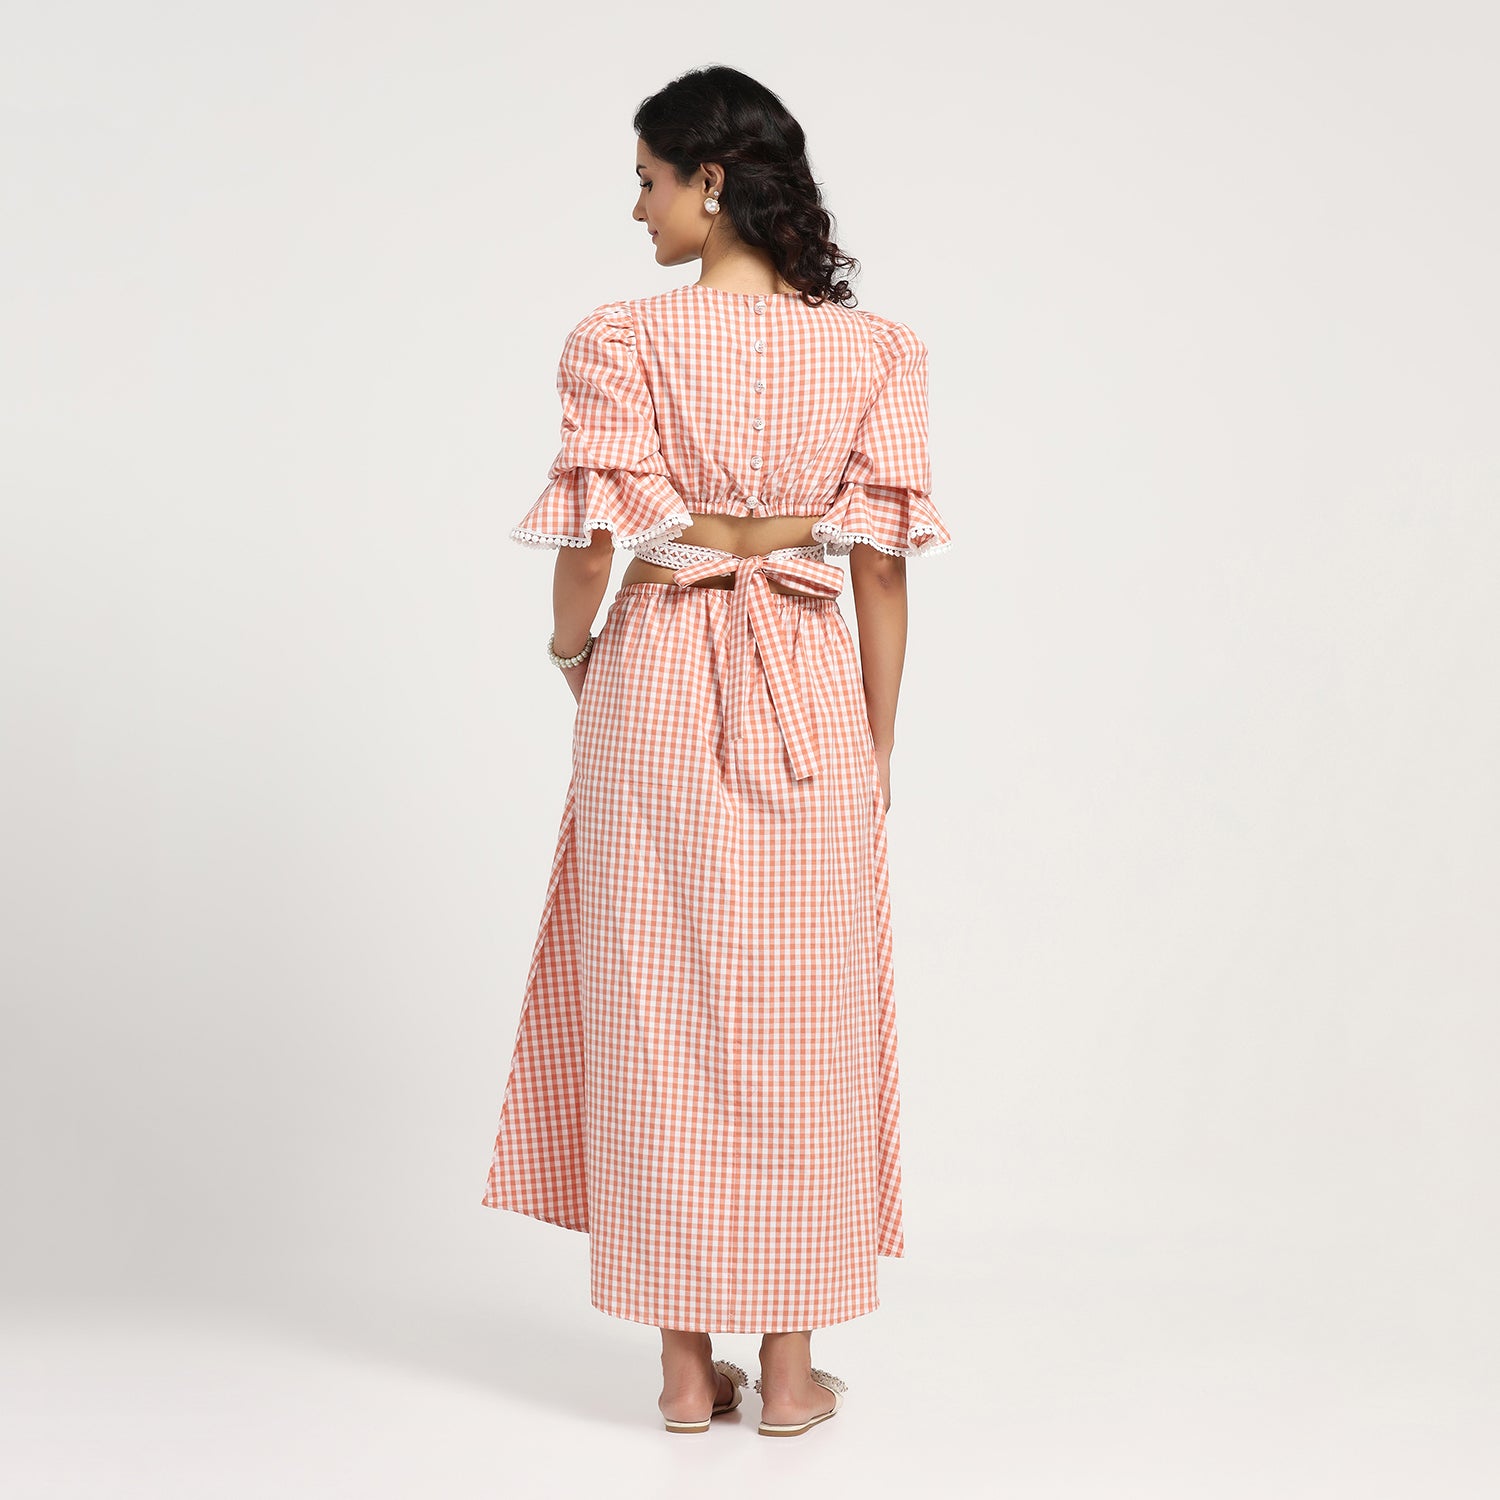 Peach Check Dress With Lace Yoke & Tie Blet